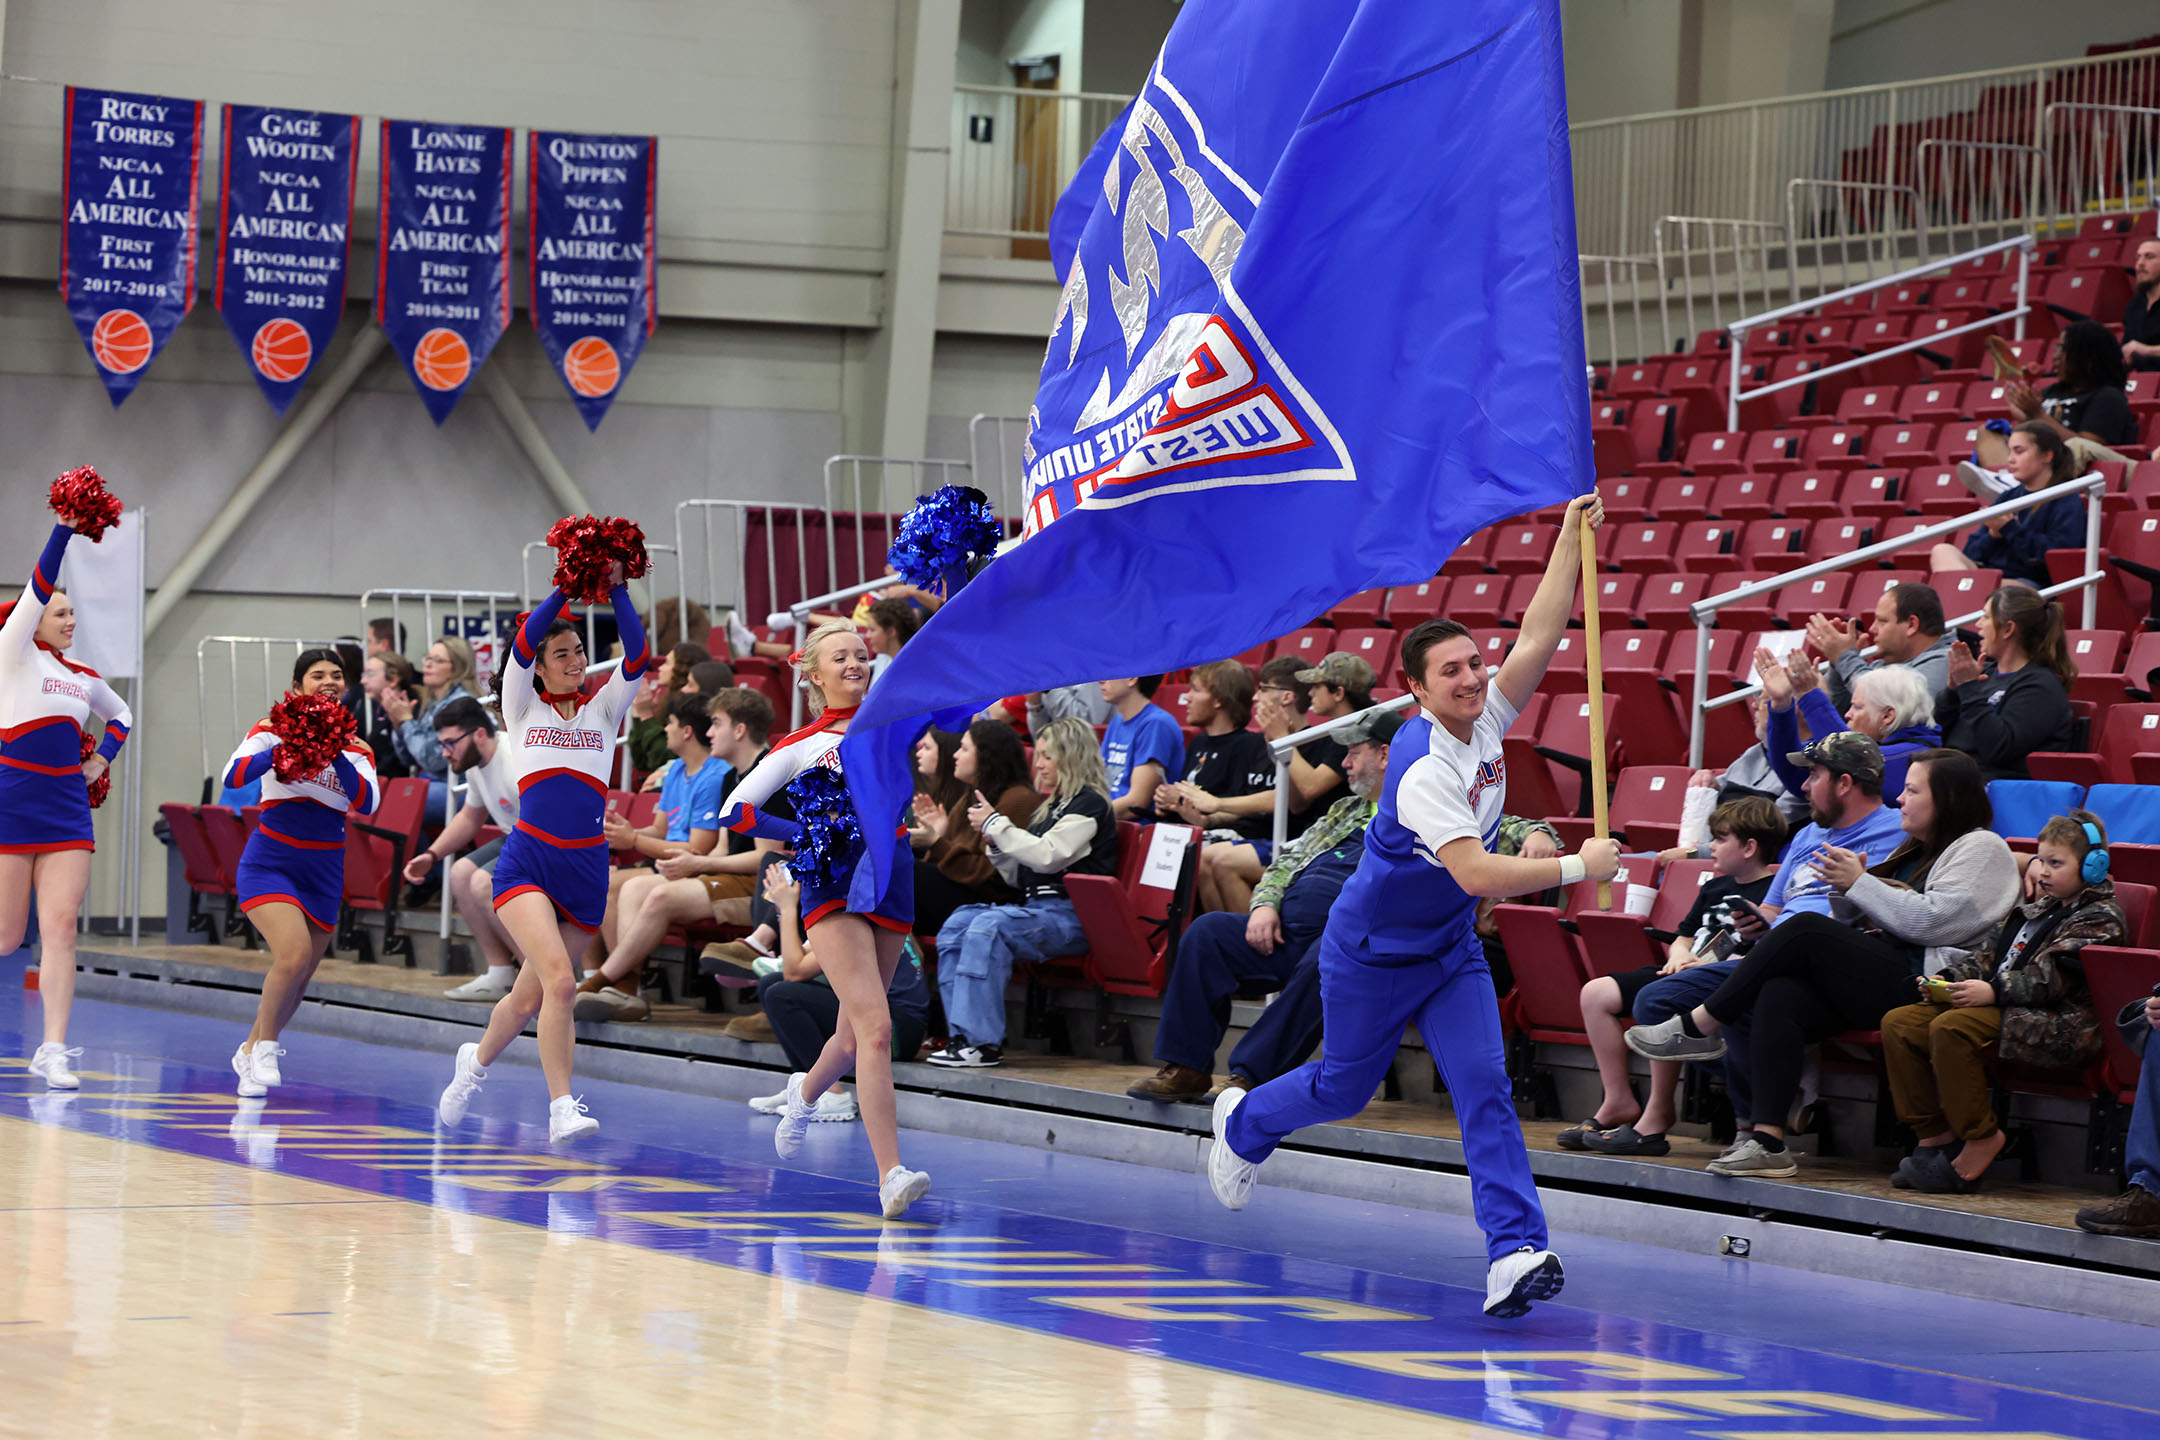 Members of the Grizzly Cheer Team at a recent home basketball game. (MSU-WP Photo)